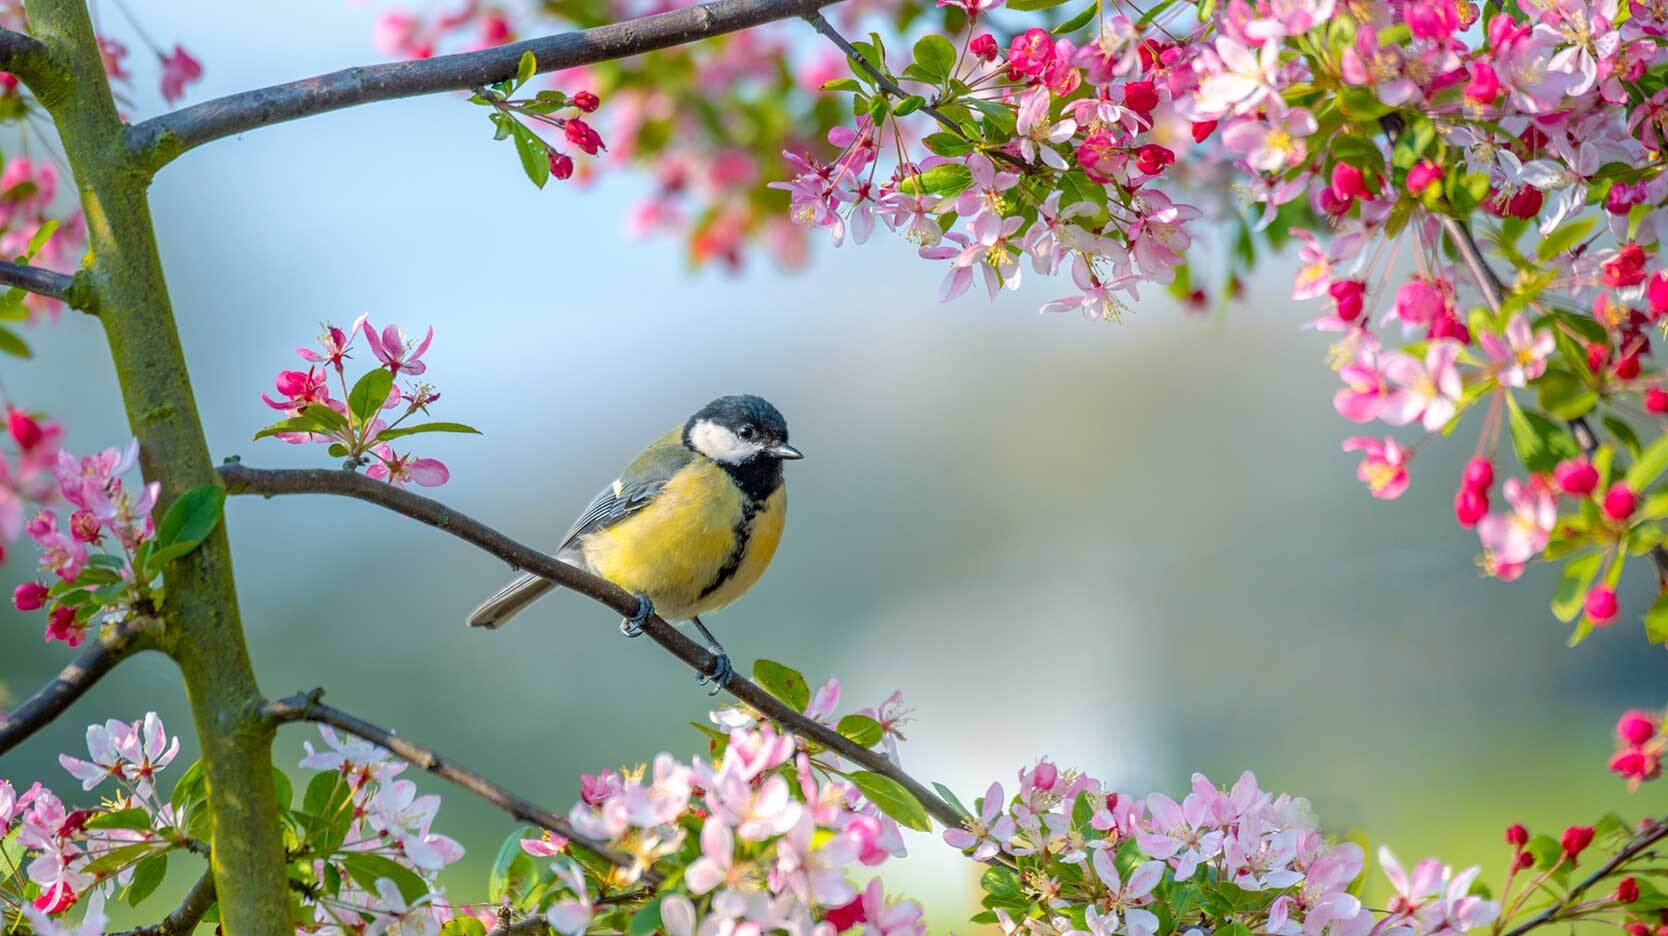 spring blossoms and bird on branch